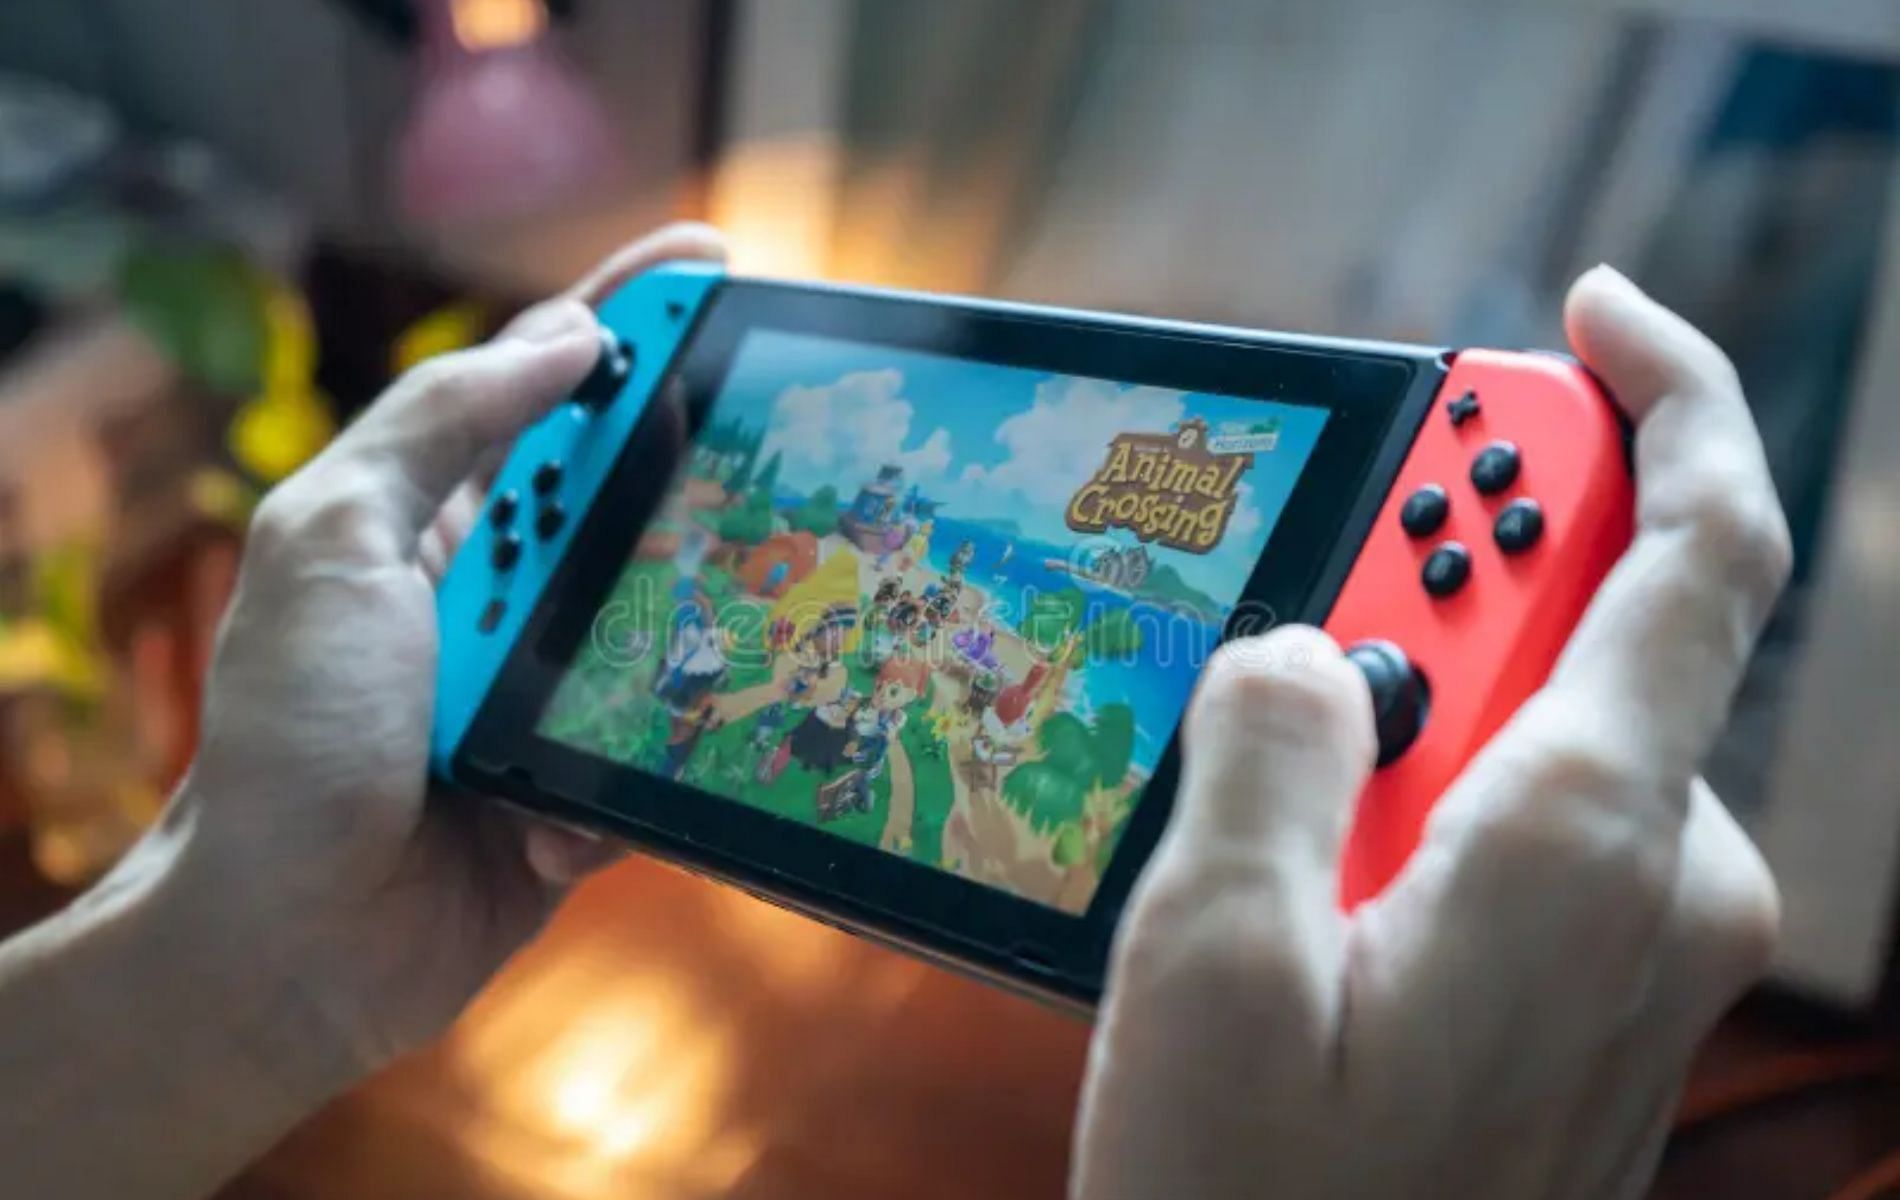 Cover art featuring the Nintendo Switch console playing the Animal Crossing new Horizons video game